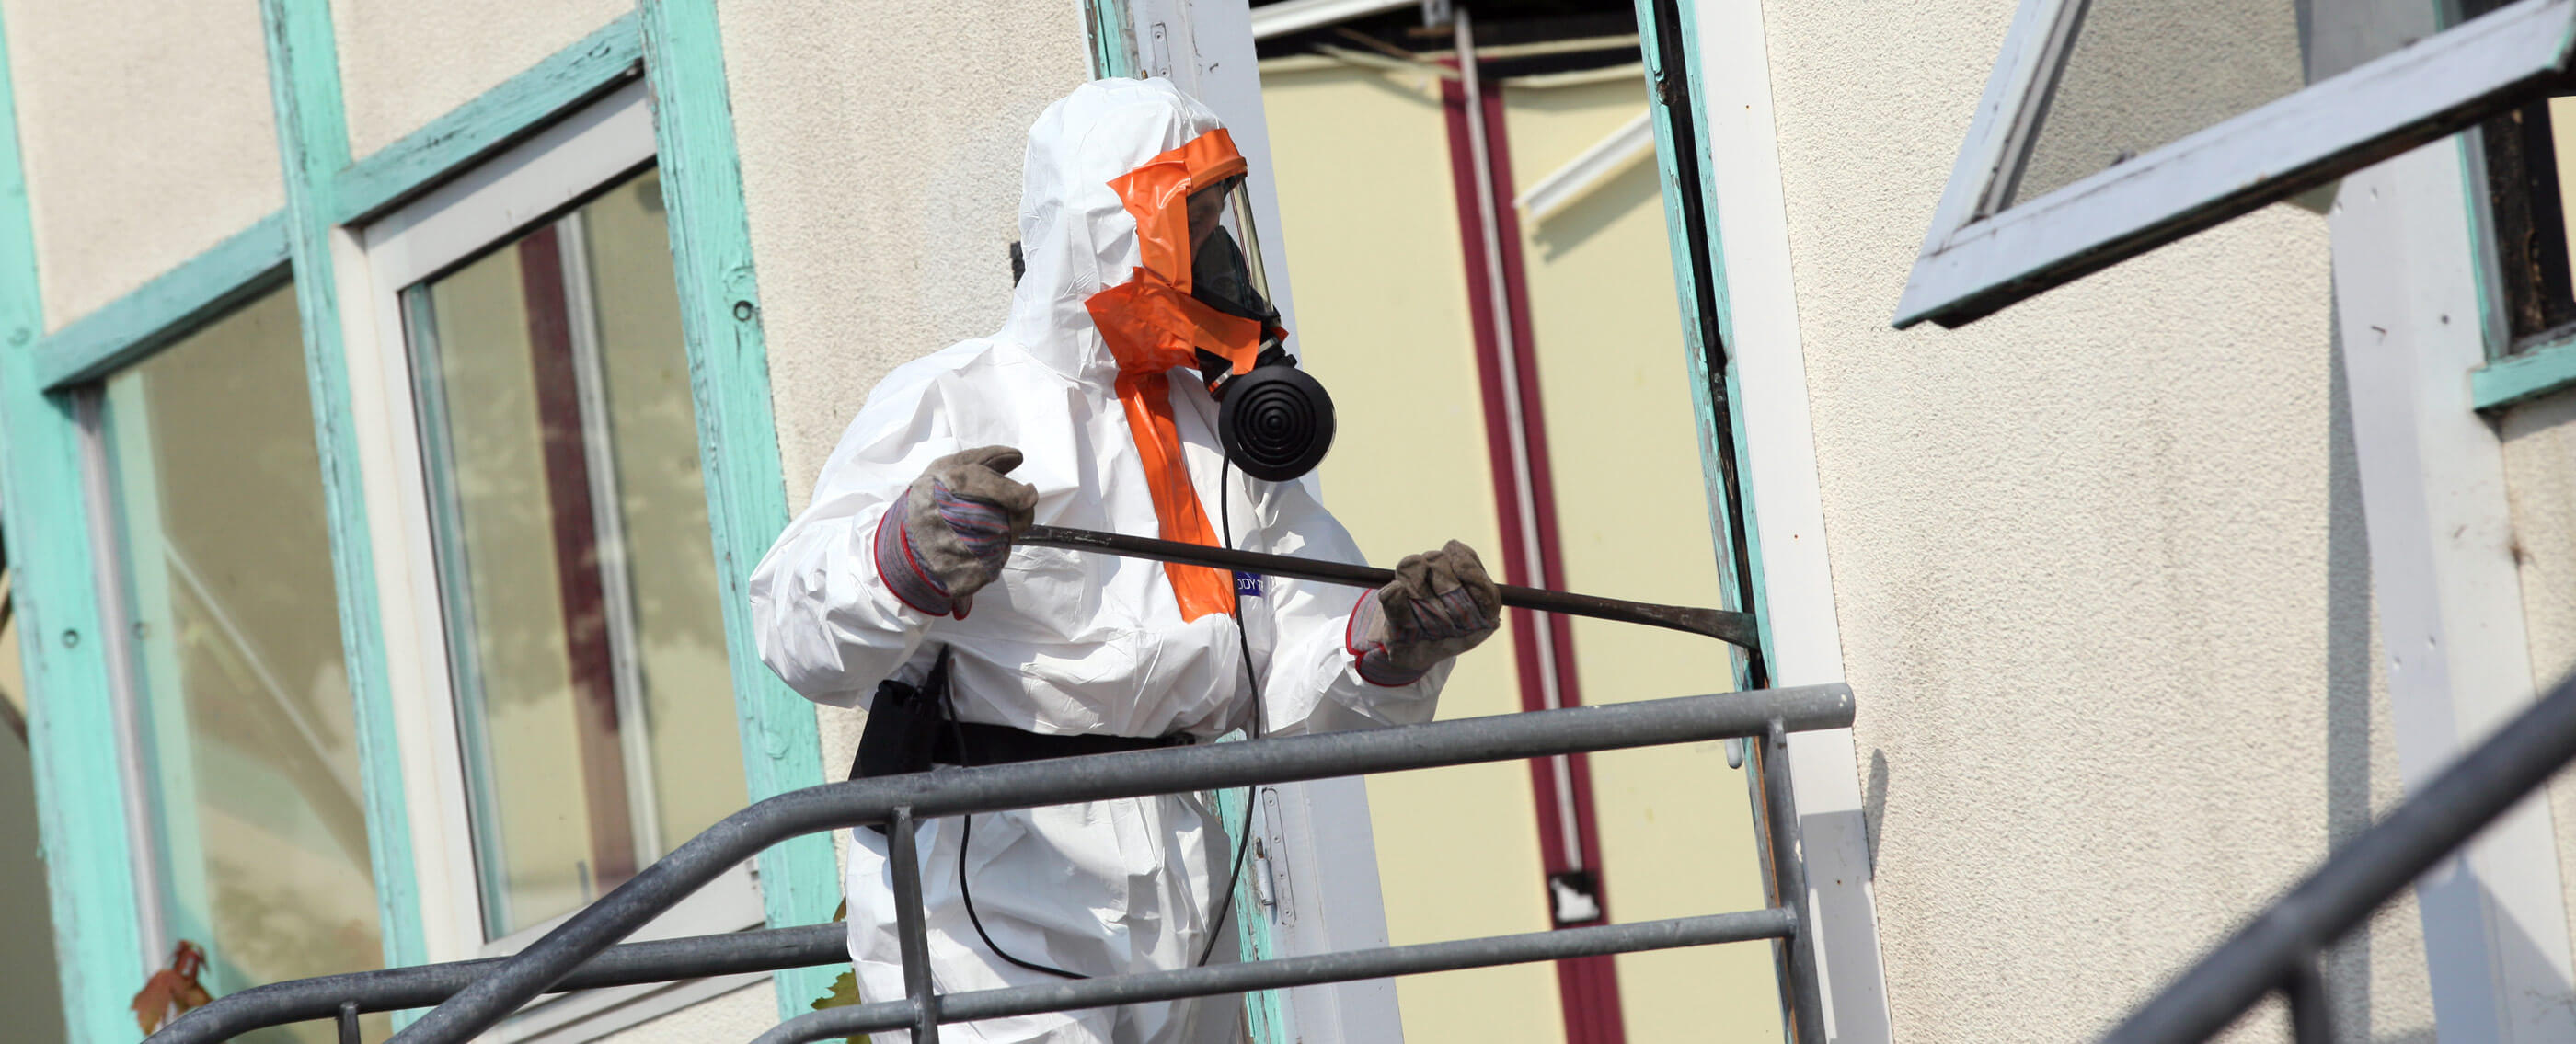 Domestic Asbestos Removal Melbourne – How Long After Asbestos Removal It Is Safe?